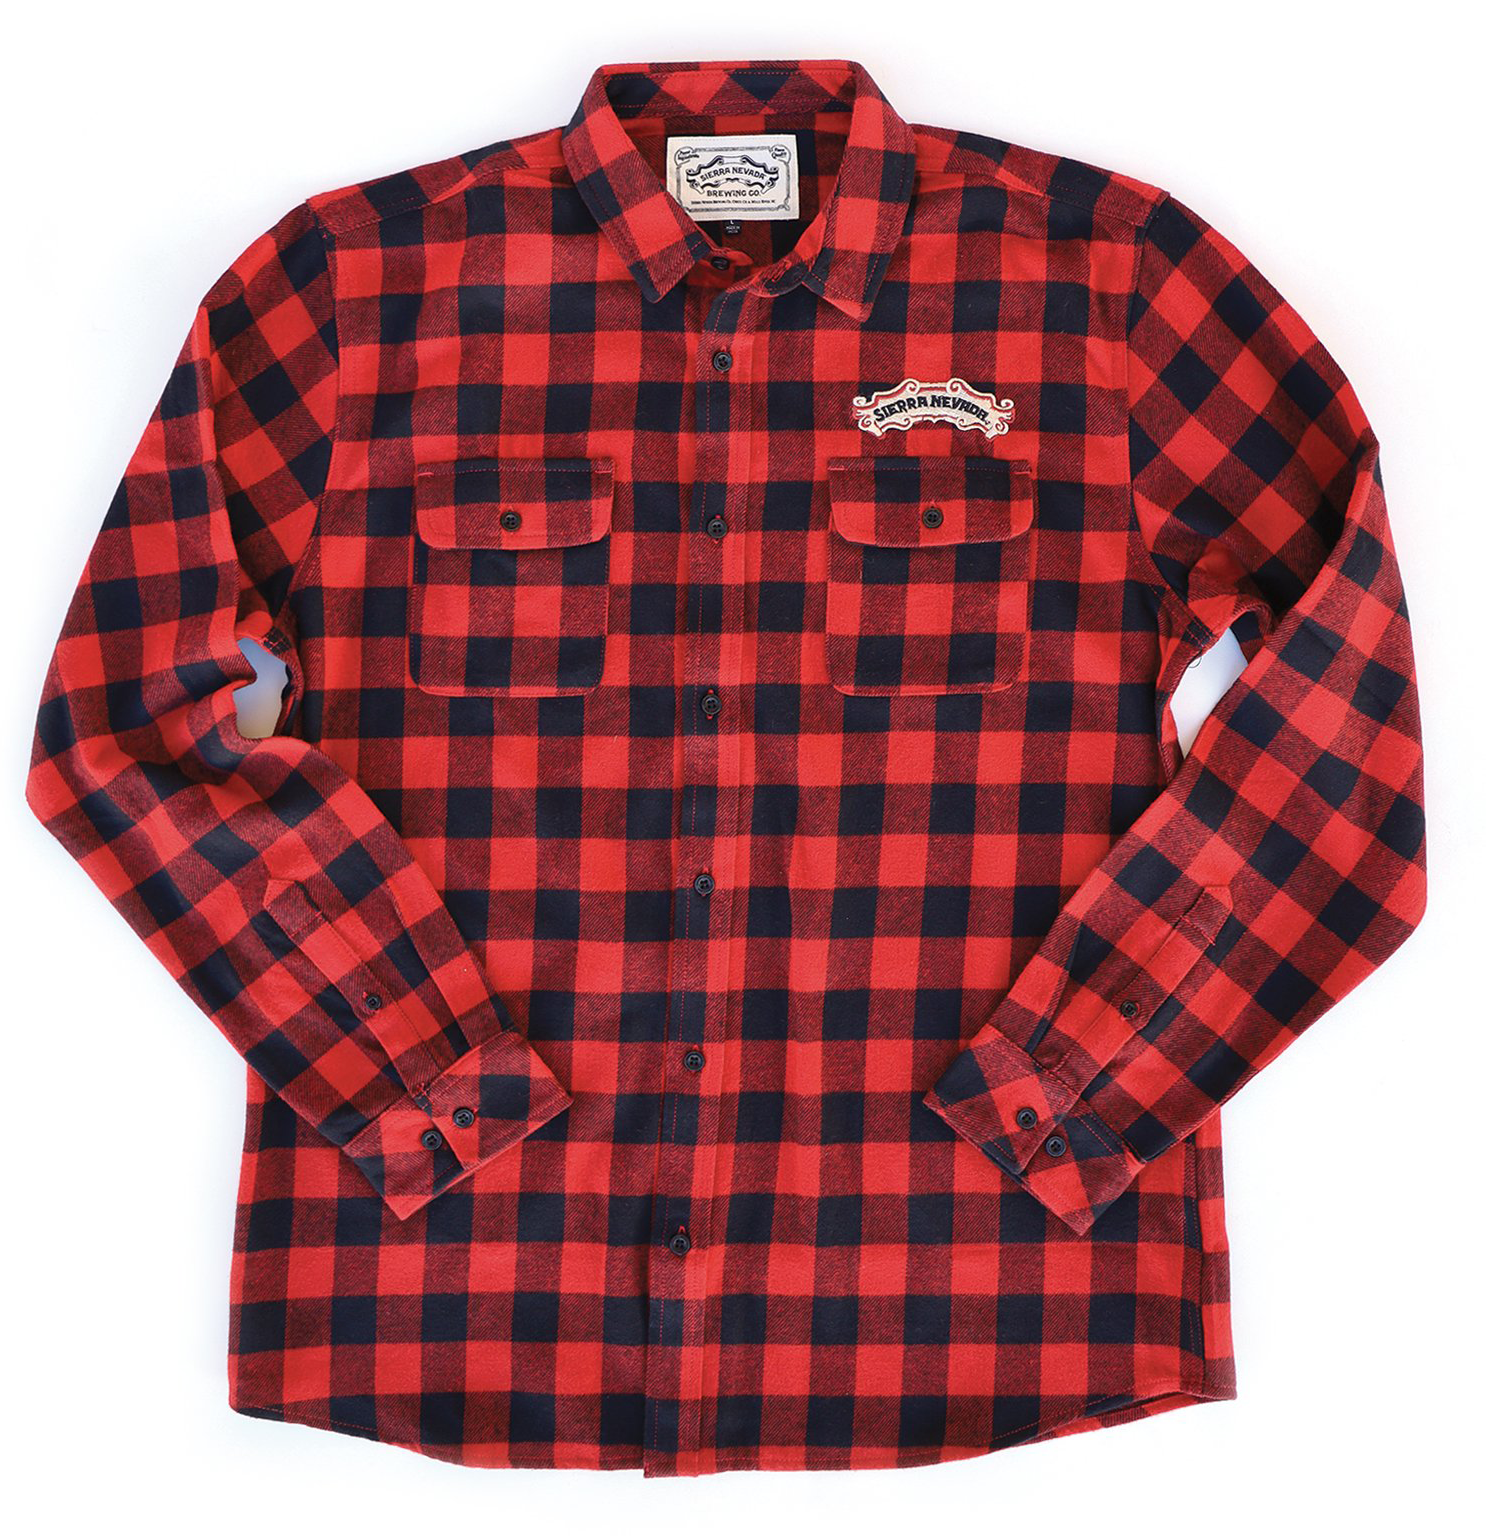 Sierra Nevada Celebration IPA custom red and black flannel button-down